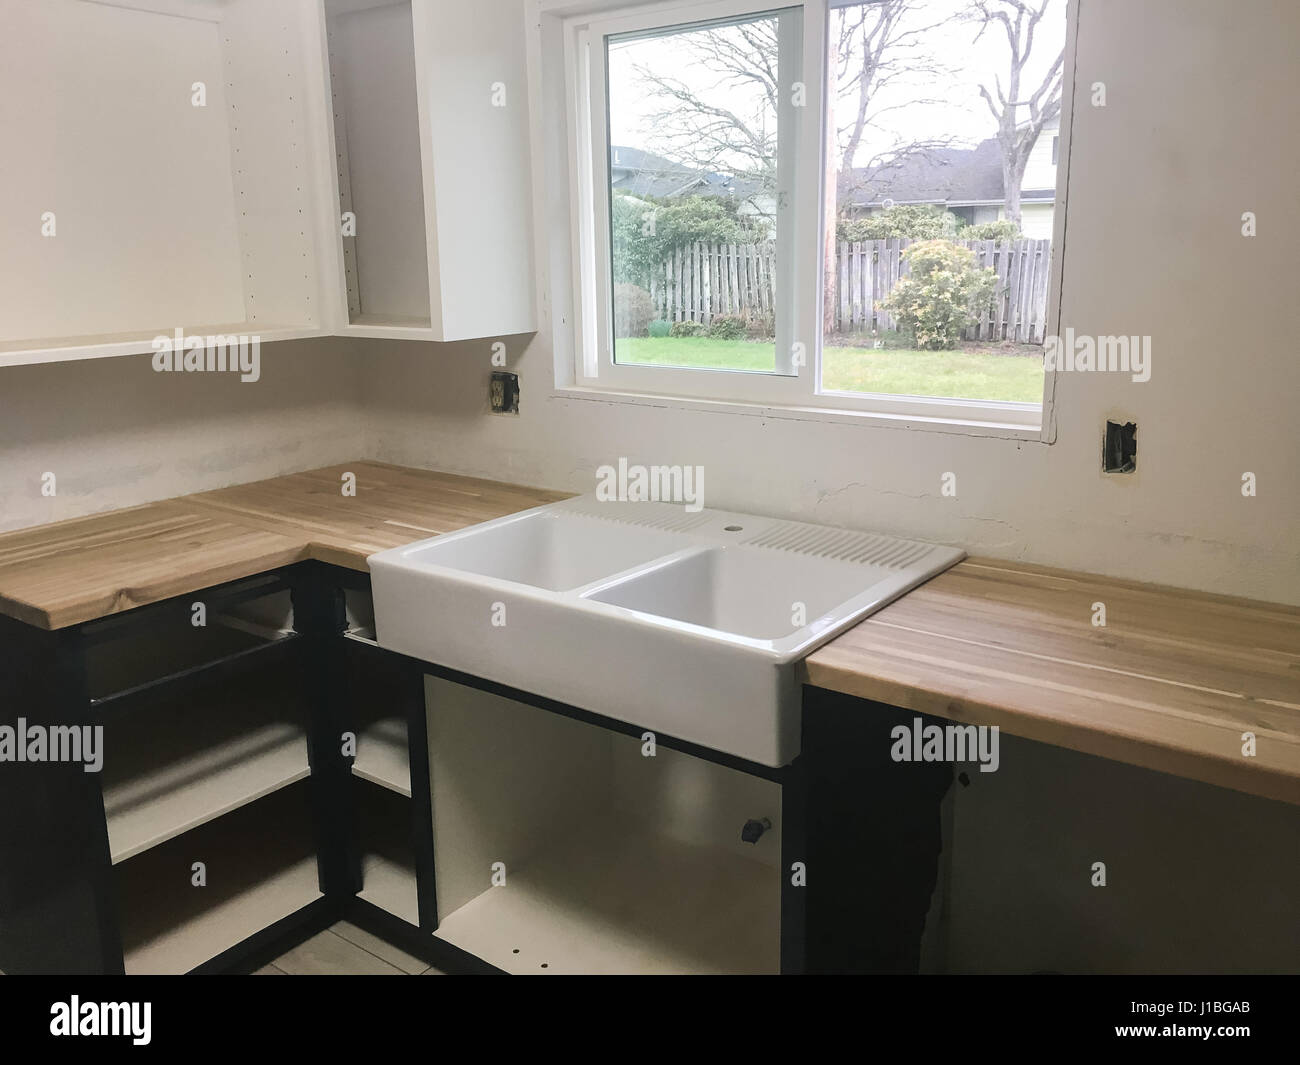 Large farmhouse sink in the kitchen of a full renovation and house remodel. Stock Photo